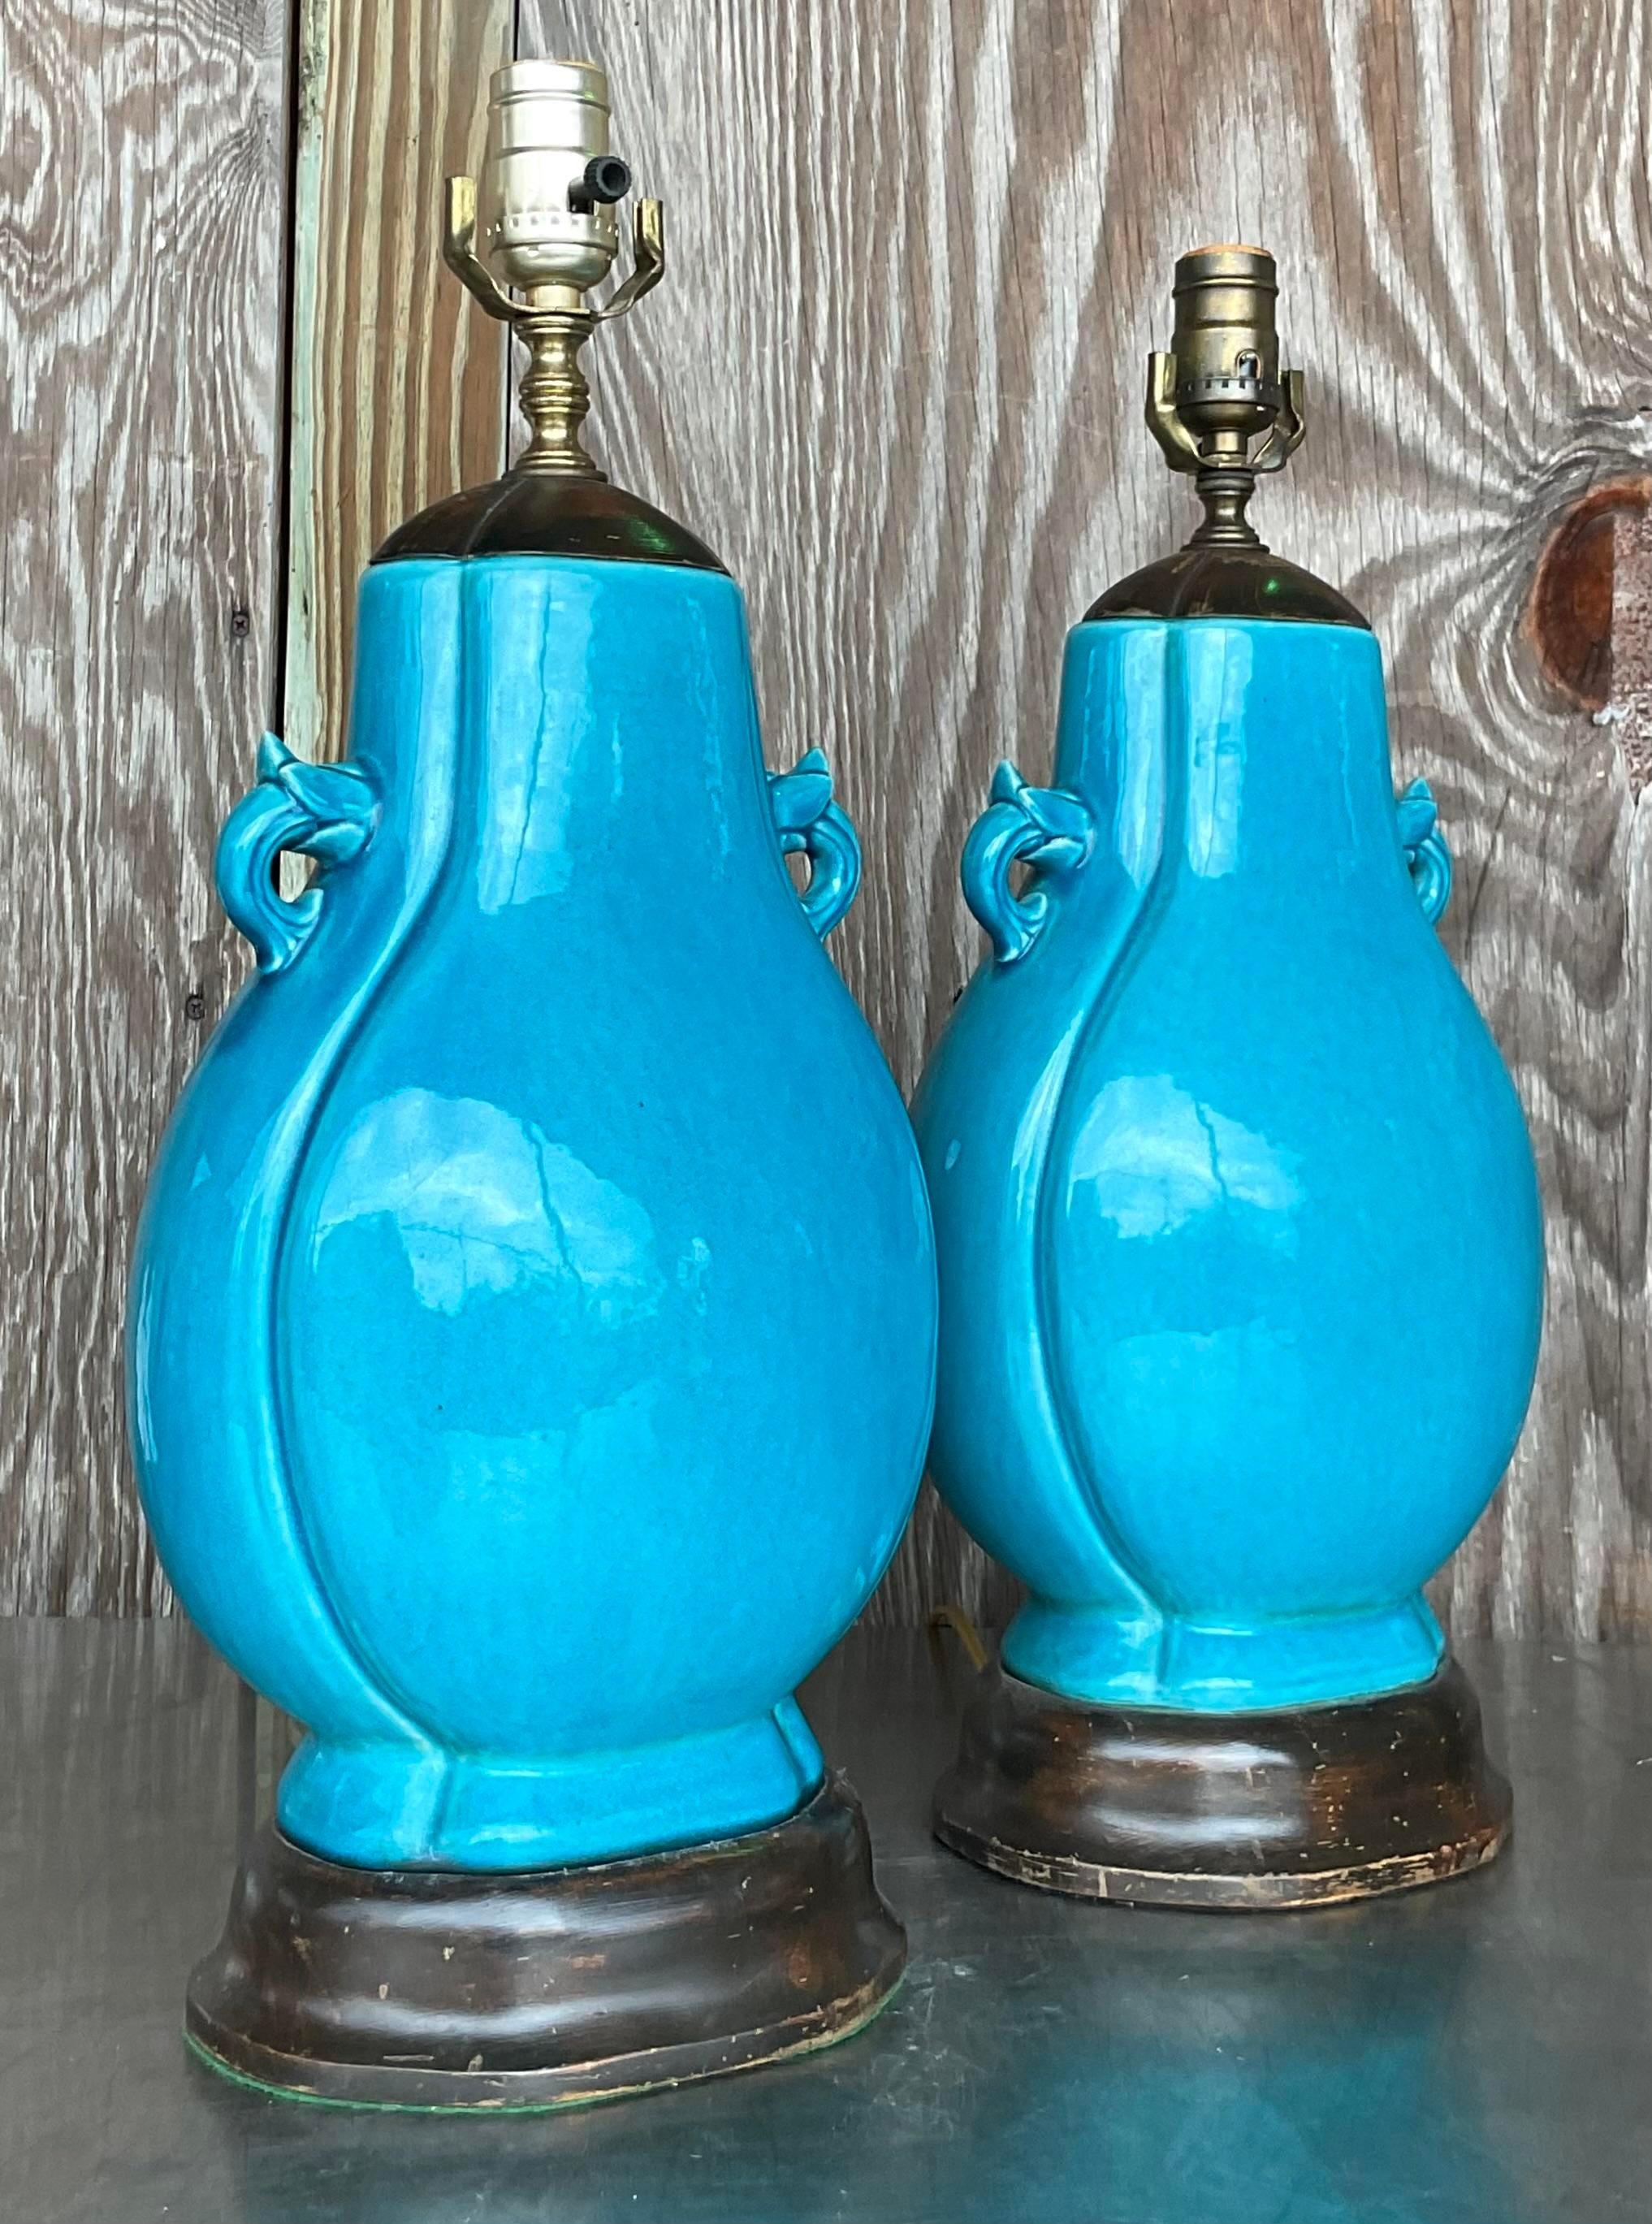 Vintage Boho Turquoise Glazed Ceramic Moonflask Table Lamps - a Pair In Good Condition For Sale In west palm beach, FL